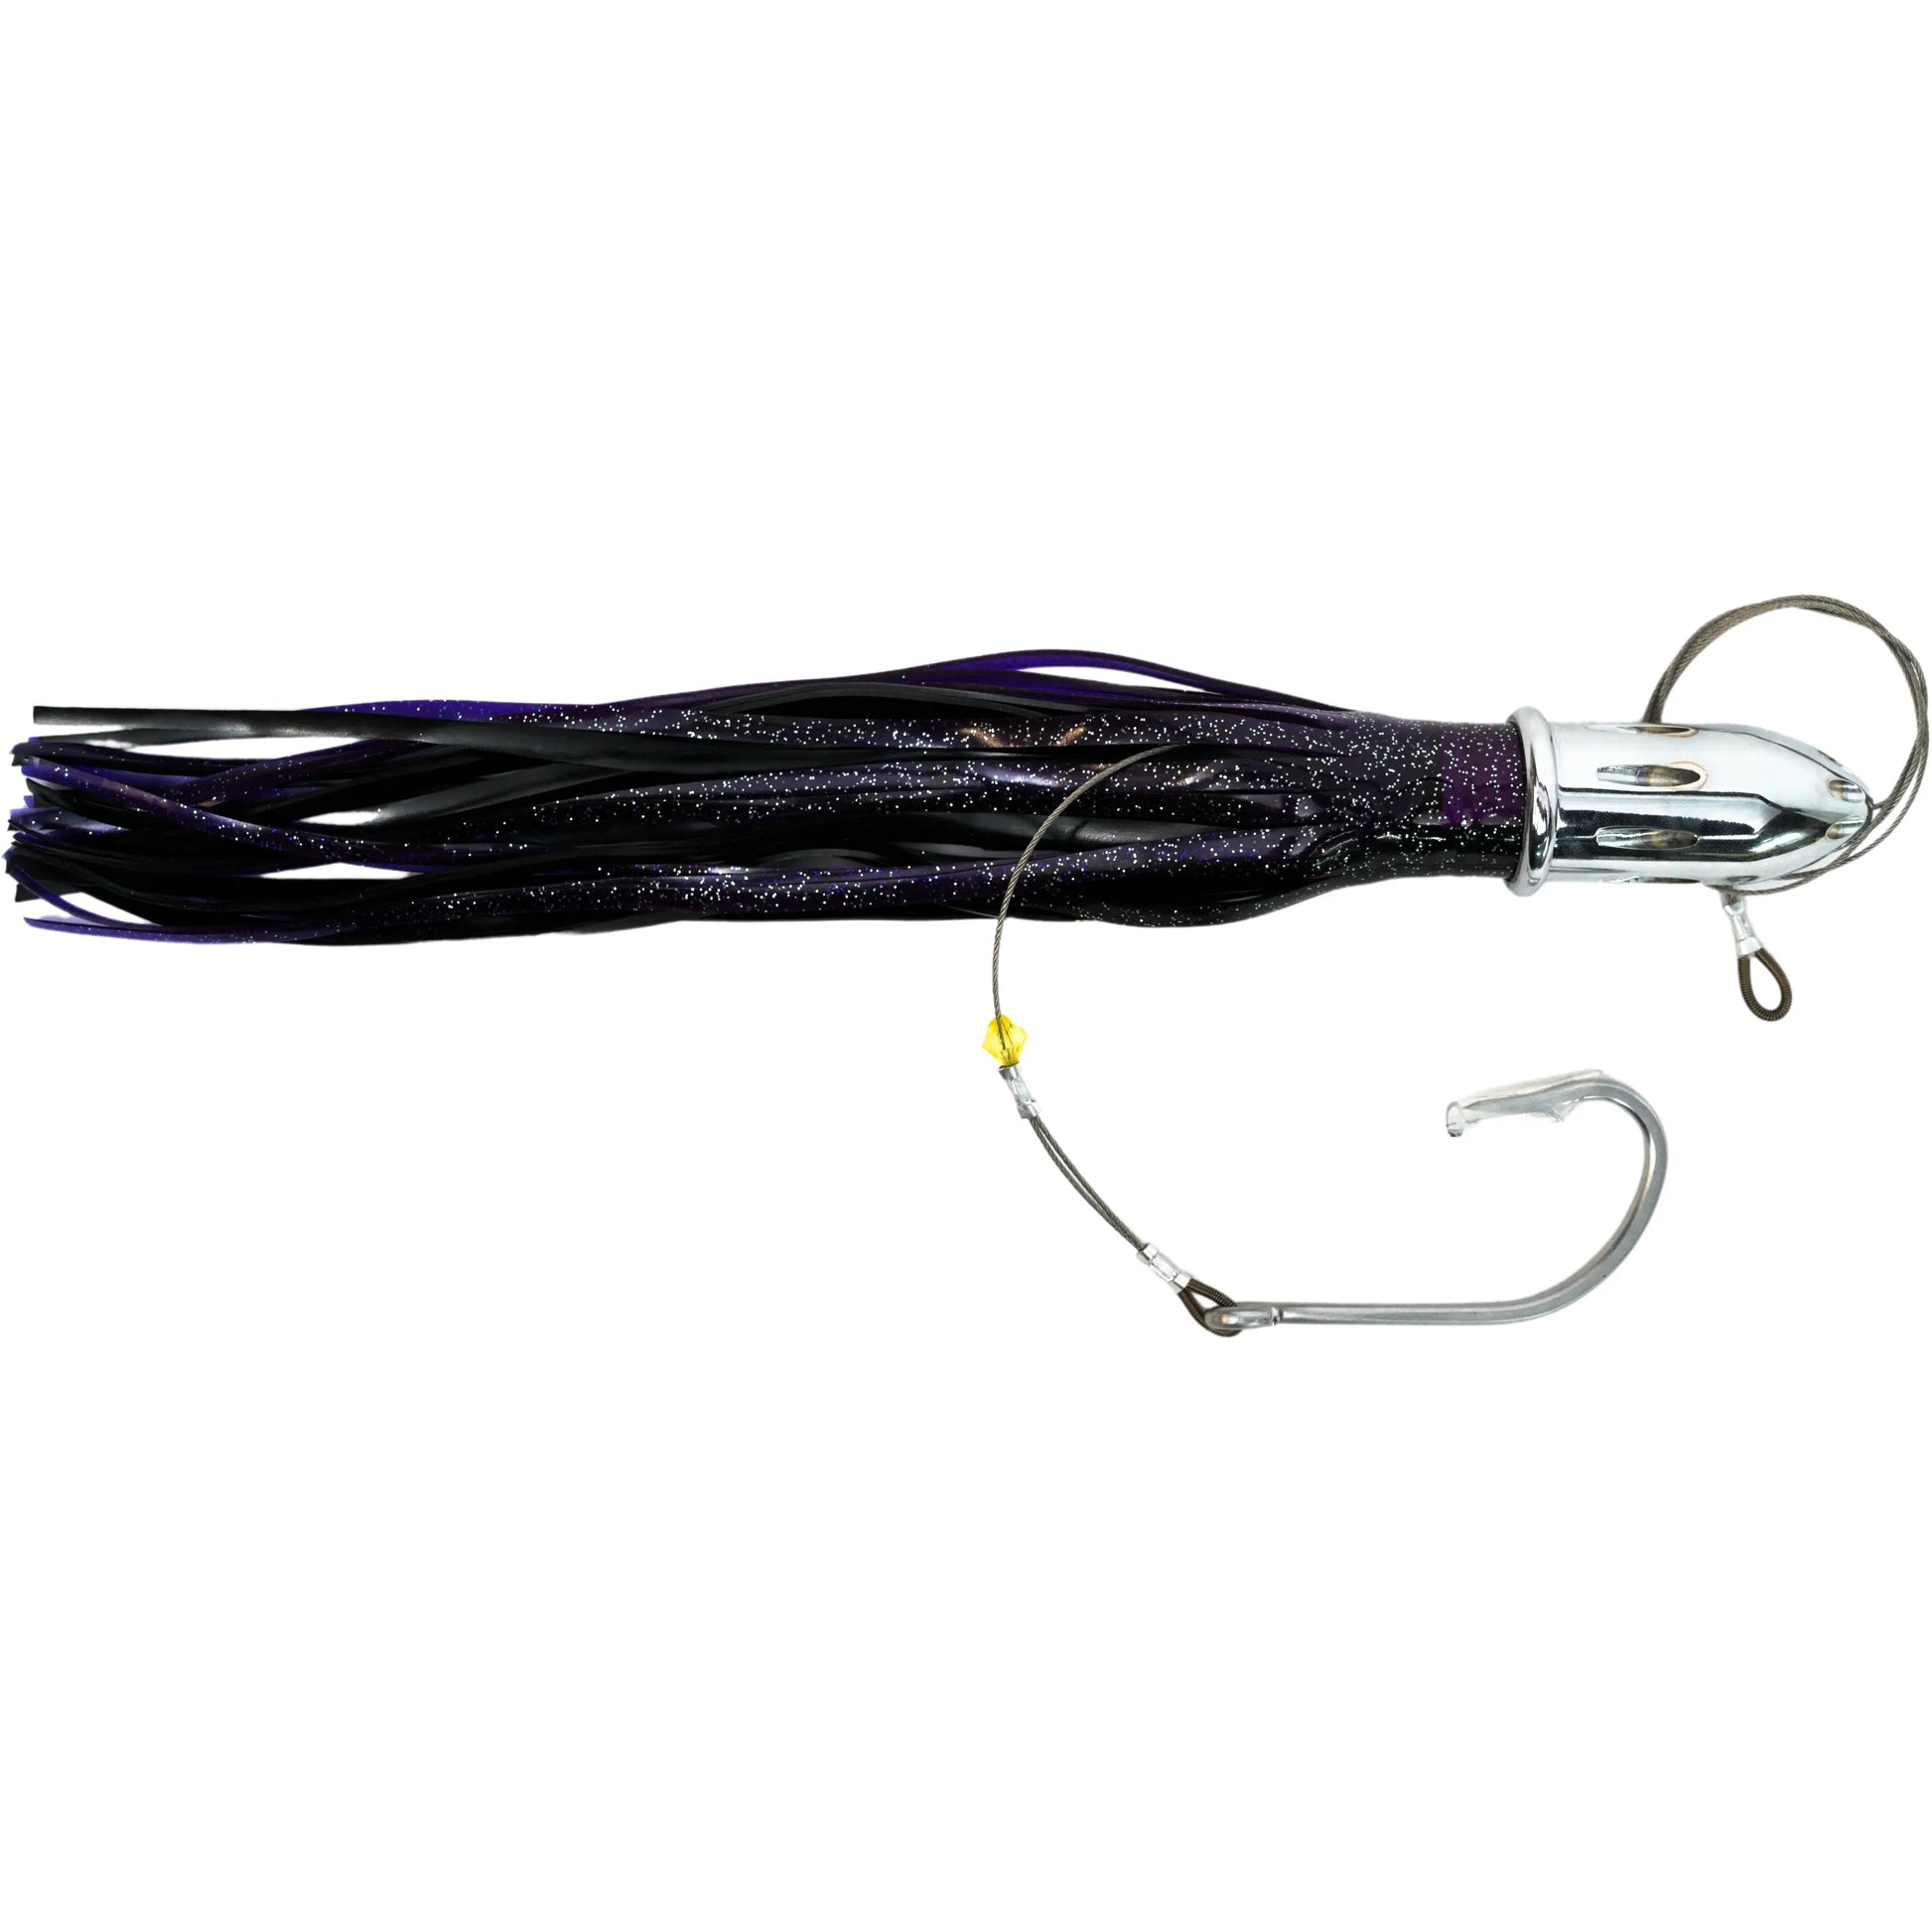 Tournament Ready High Speed Wahoo Lures - Weighted Trolling Set